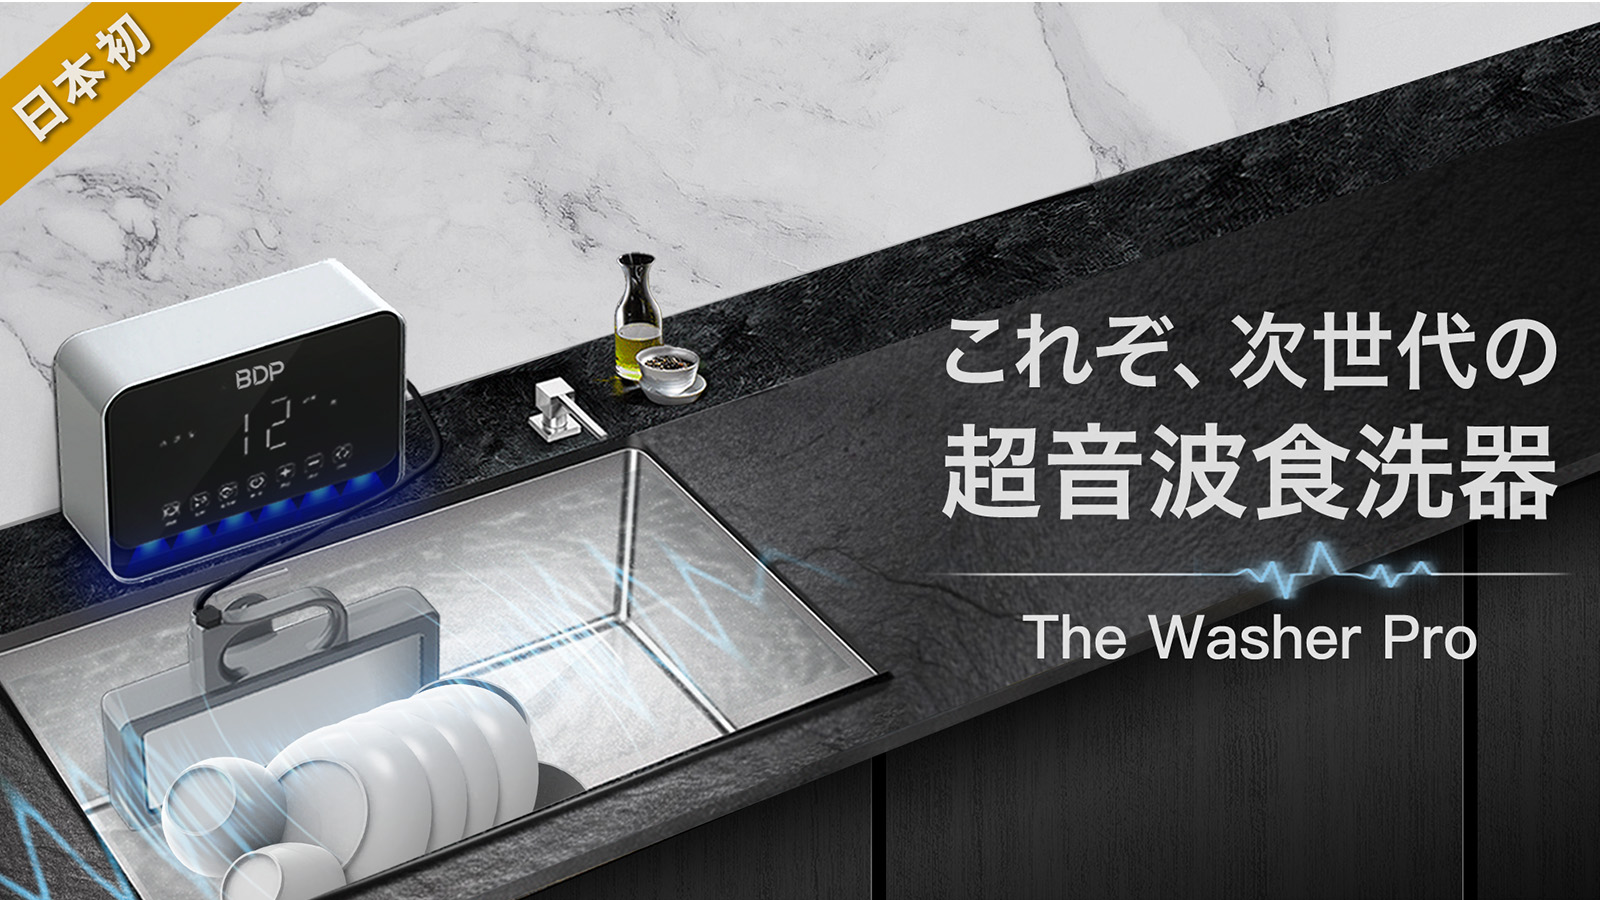 BDP The washer pro 超音波食洗機 ウォッシャープロ | www.innoveering.net